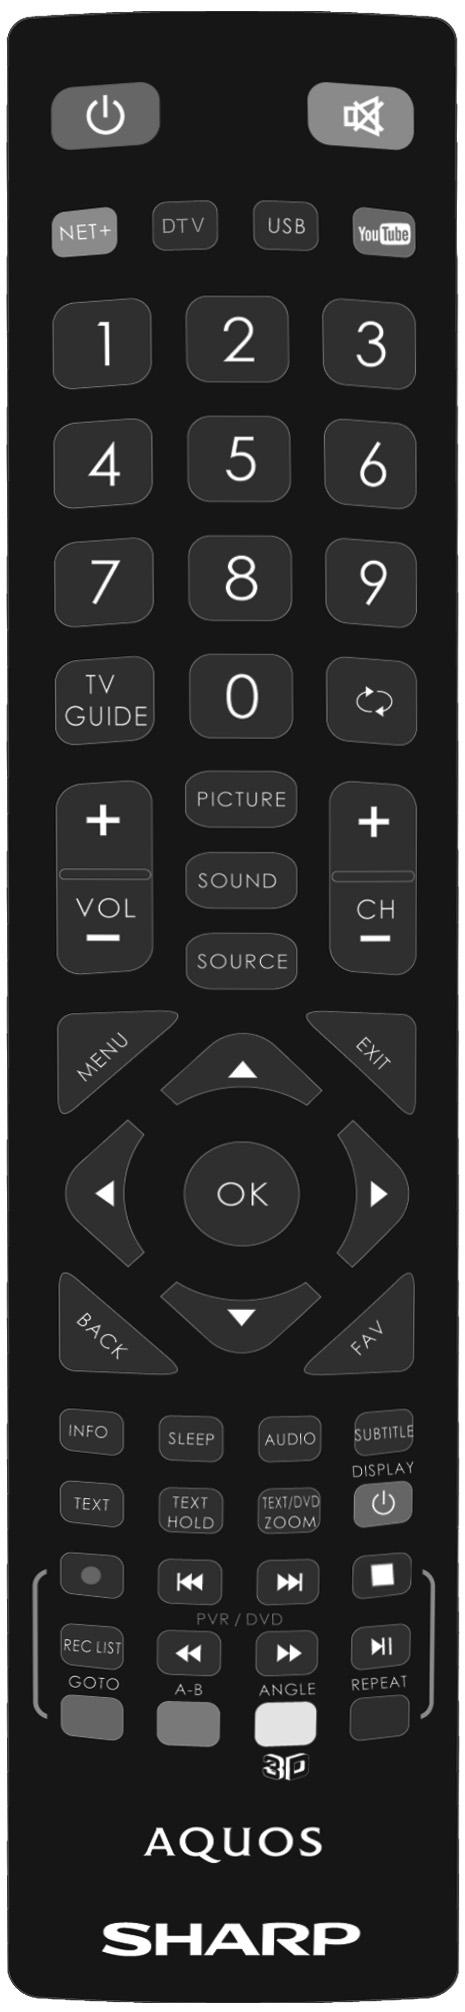 Remote control REMOTE CONTROL During the initial set up of your TV you will need to pair the remote control to the TV.